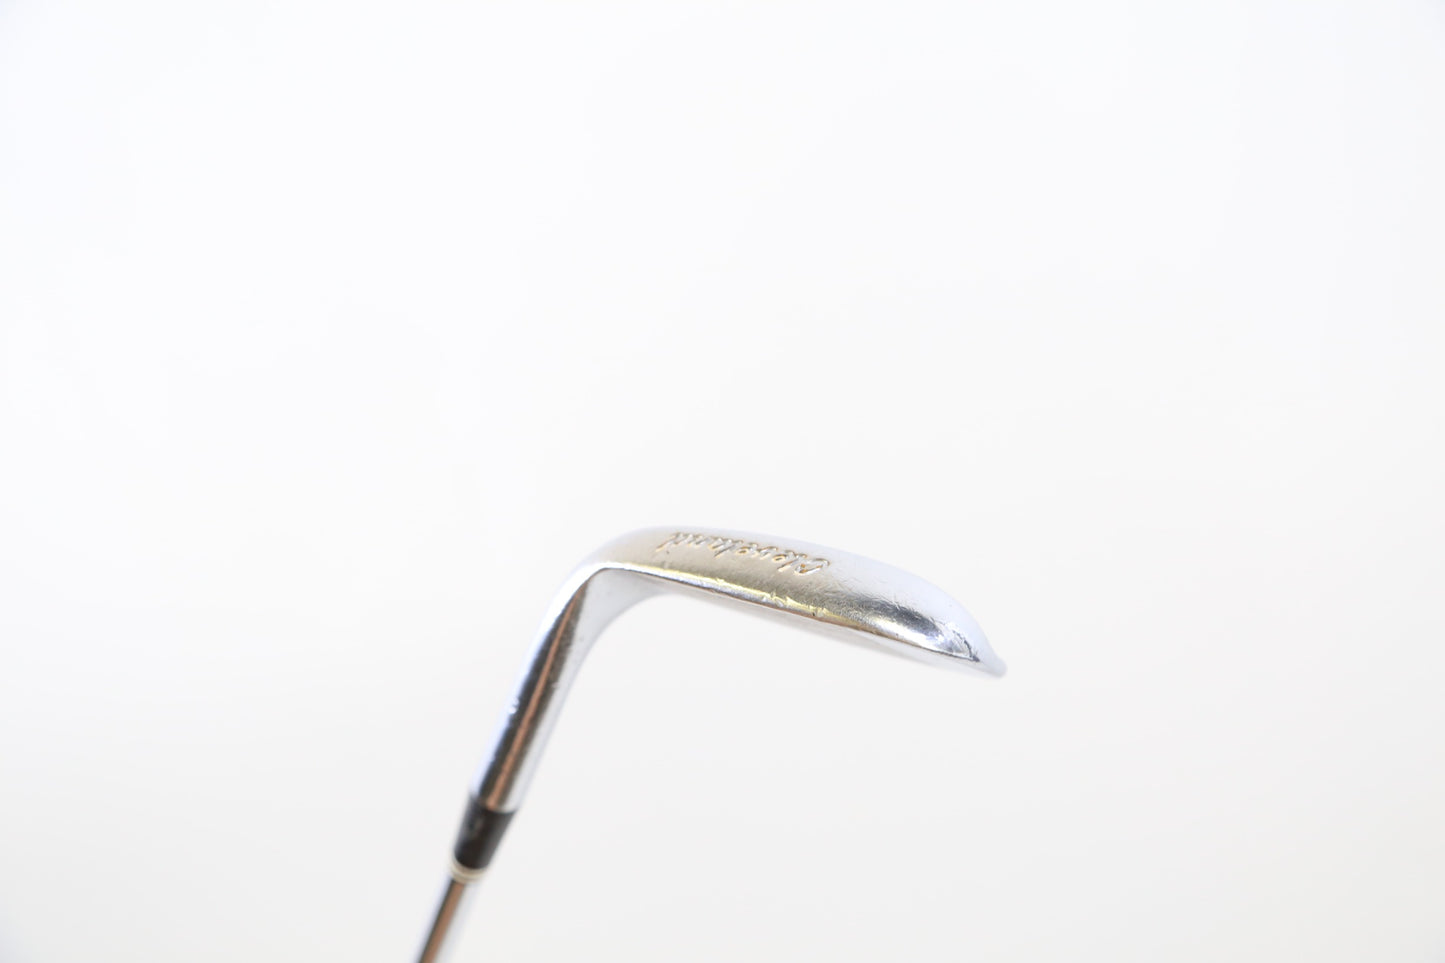 Used Cleveland 588 Tour Action Gap Wedge - Right-Handed - 53 Degrees - Stiff Flex-Next Round